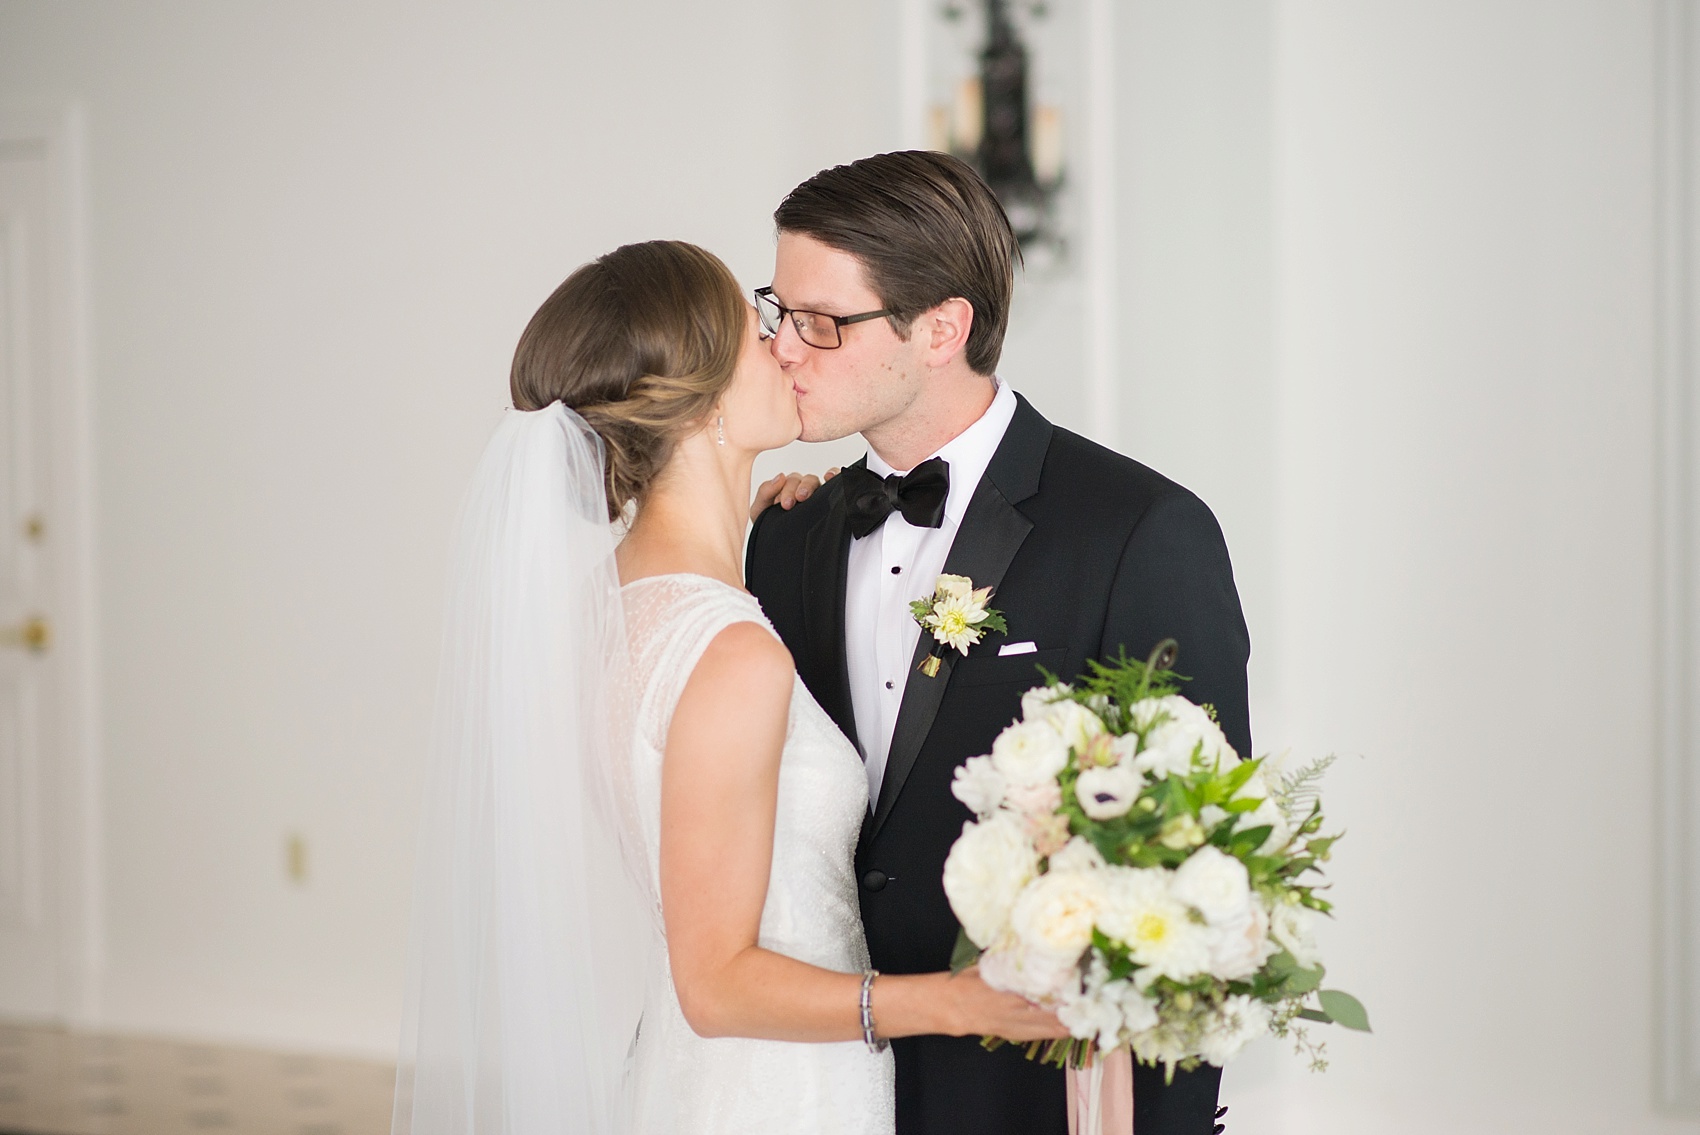 Pearl River Hilton first look wedding photos. Images by Mikkel Paige Photography, NYC wedding photographer.